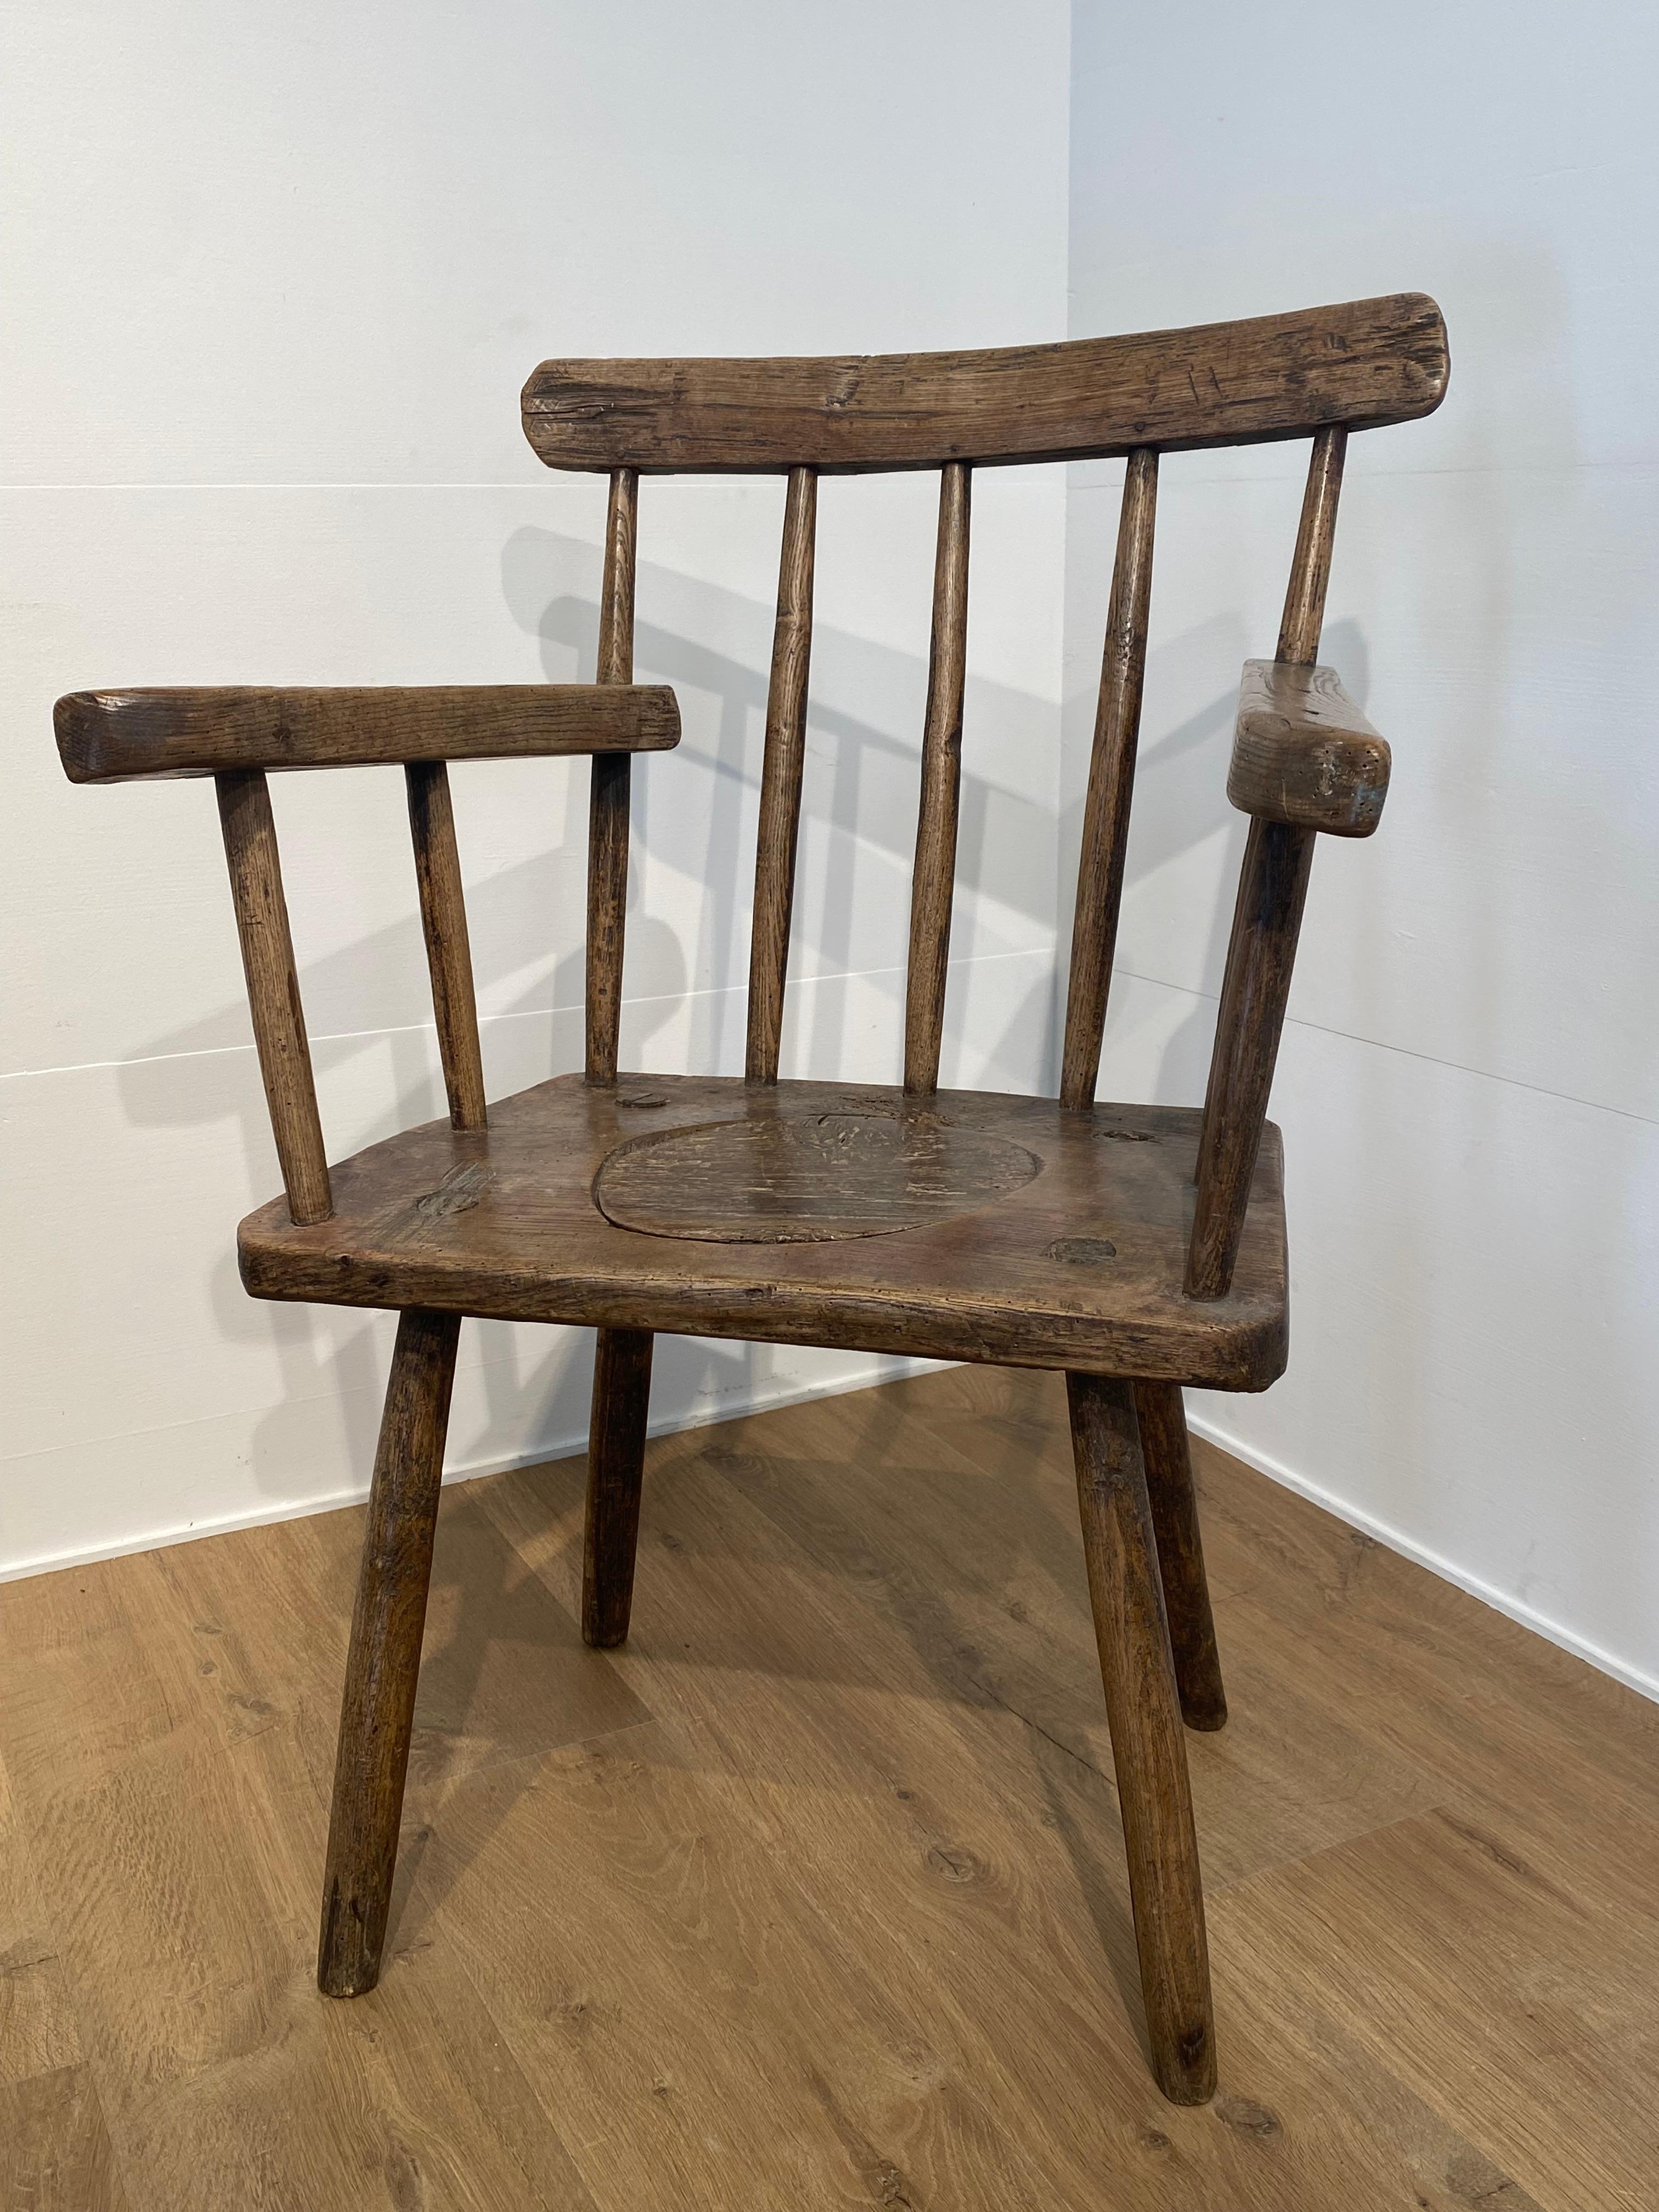 Brutalist and Primitive Chair In Good Condition For Sale In Schellebelle, BE